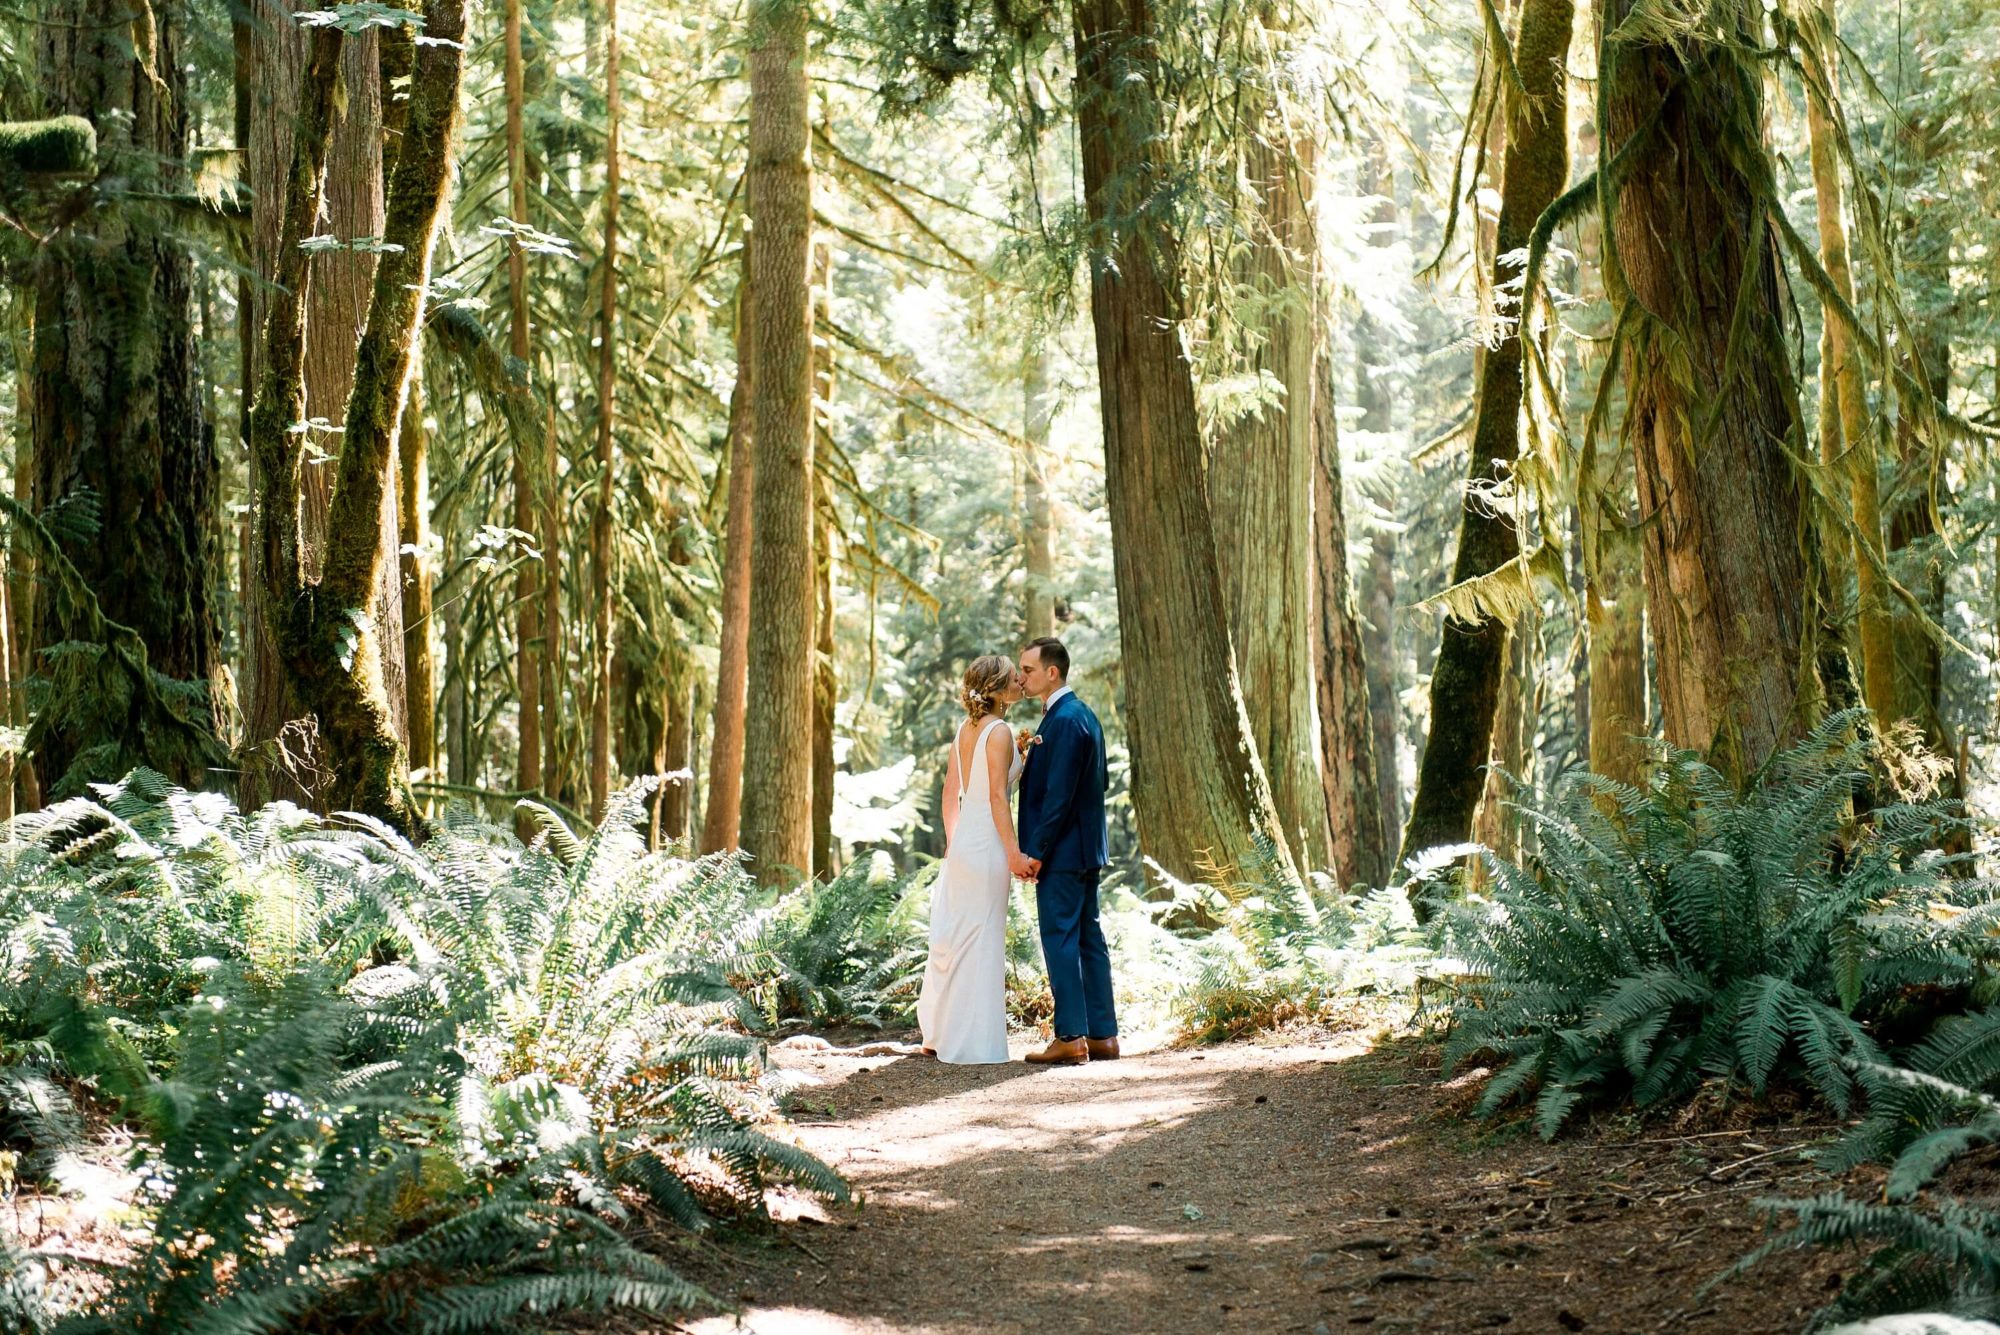 Bride and groom on a forest path in the Hoh Rainforest